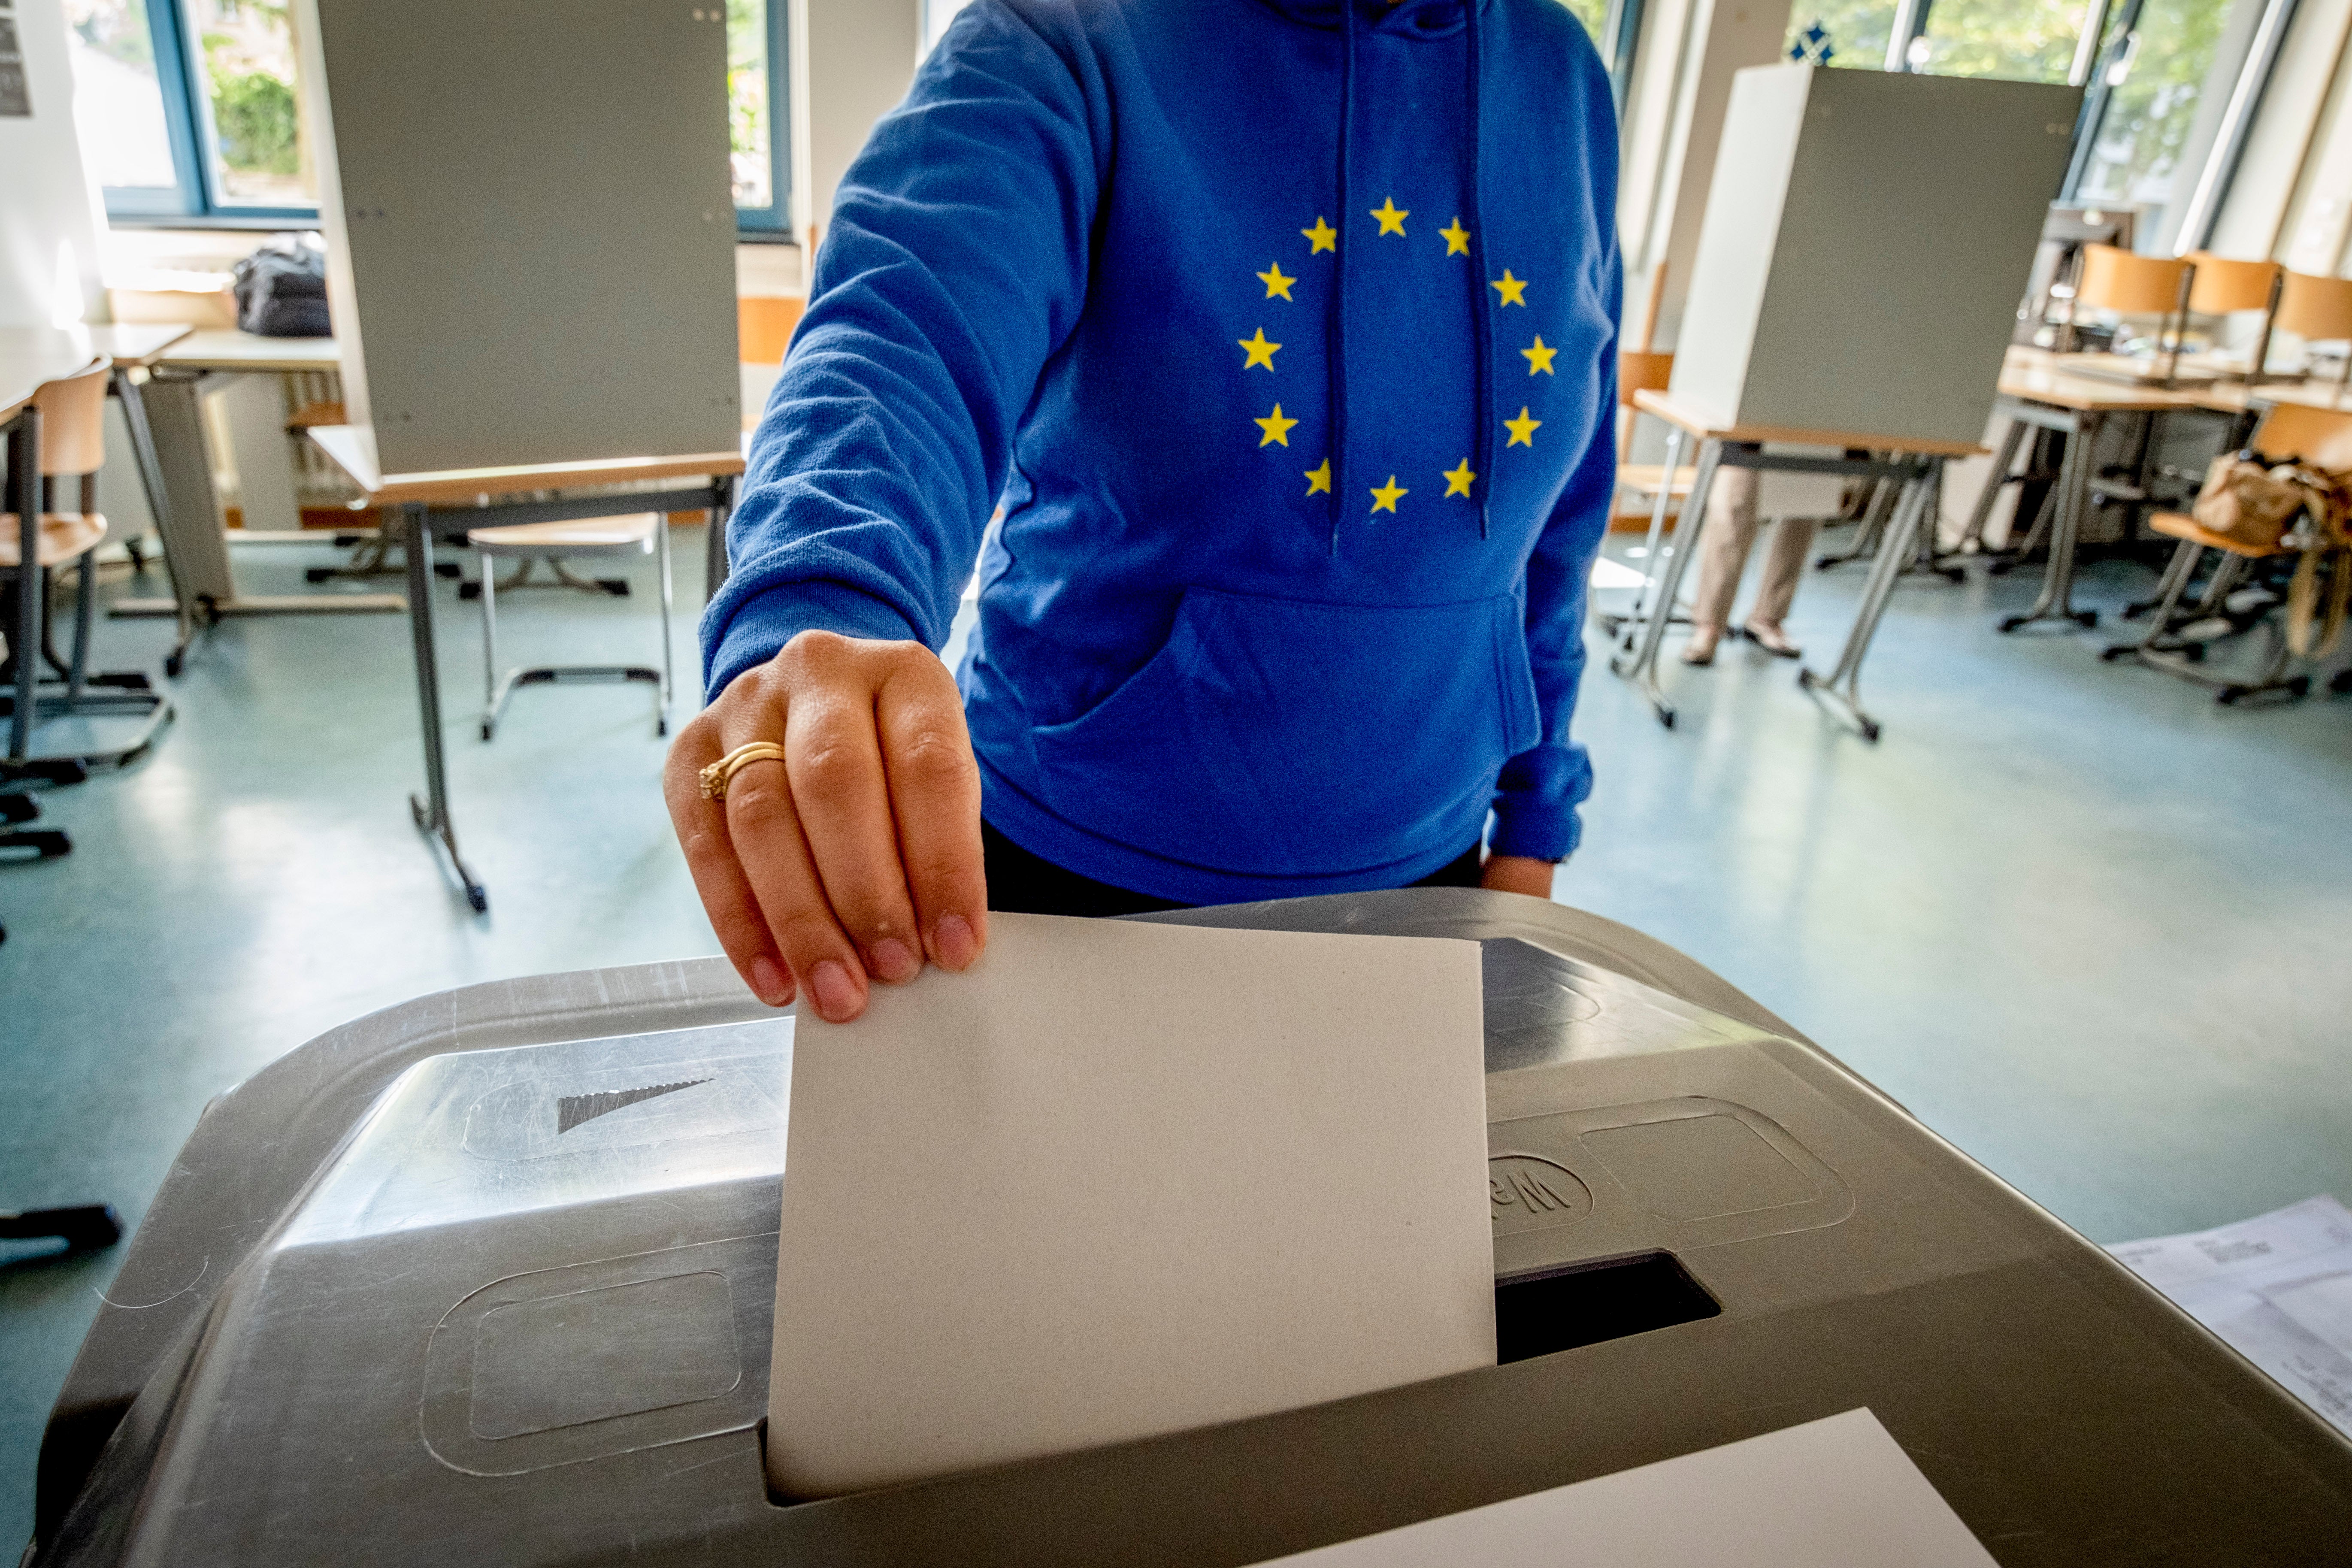 The European parliamentary elections finished over the weekend